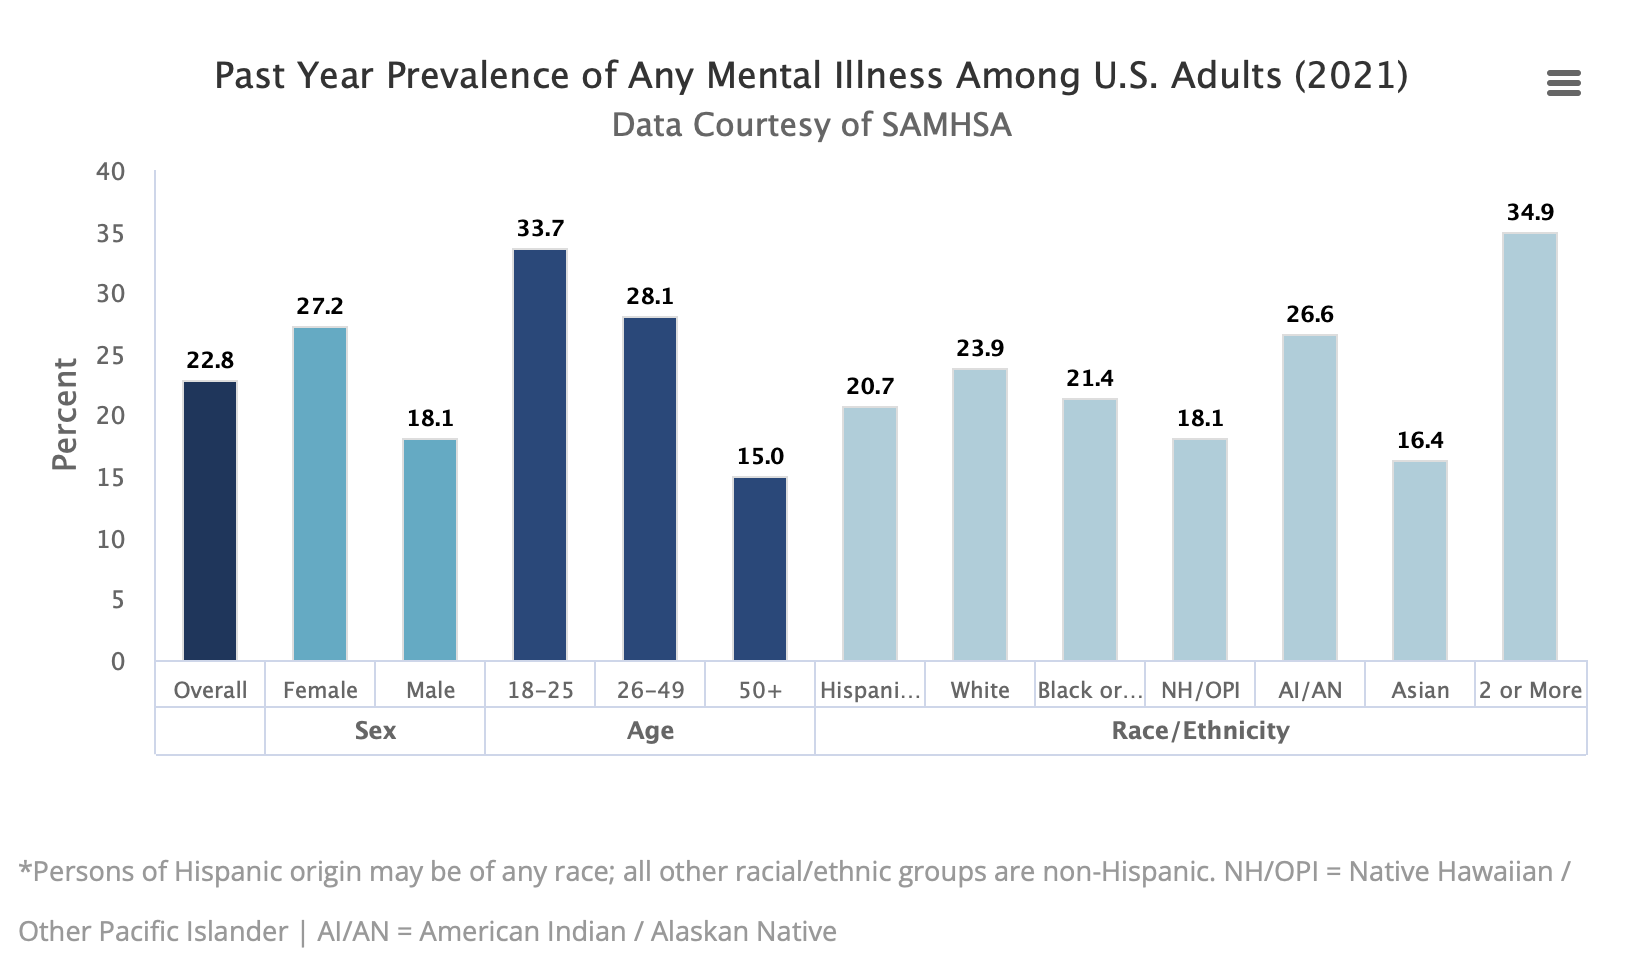 The prevalence of AMI was higher among females (27.2%) than males (18.1%). Young adults aged 18-25 years had the highest prevalence of AMI (33.7%) compared to adults aged 26-49 years (28.1%) and aged 50 and older (15.0%). The prevalence of AMI was highest among the adults reporting two or more races (34.9%), followed by American Indian / Alaskan Native (AI/AN) adults (26.6%). The prevalence of AMI was lowest among Asian adults (16.4%).